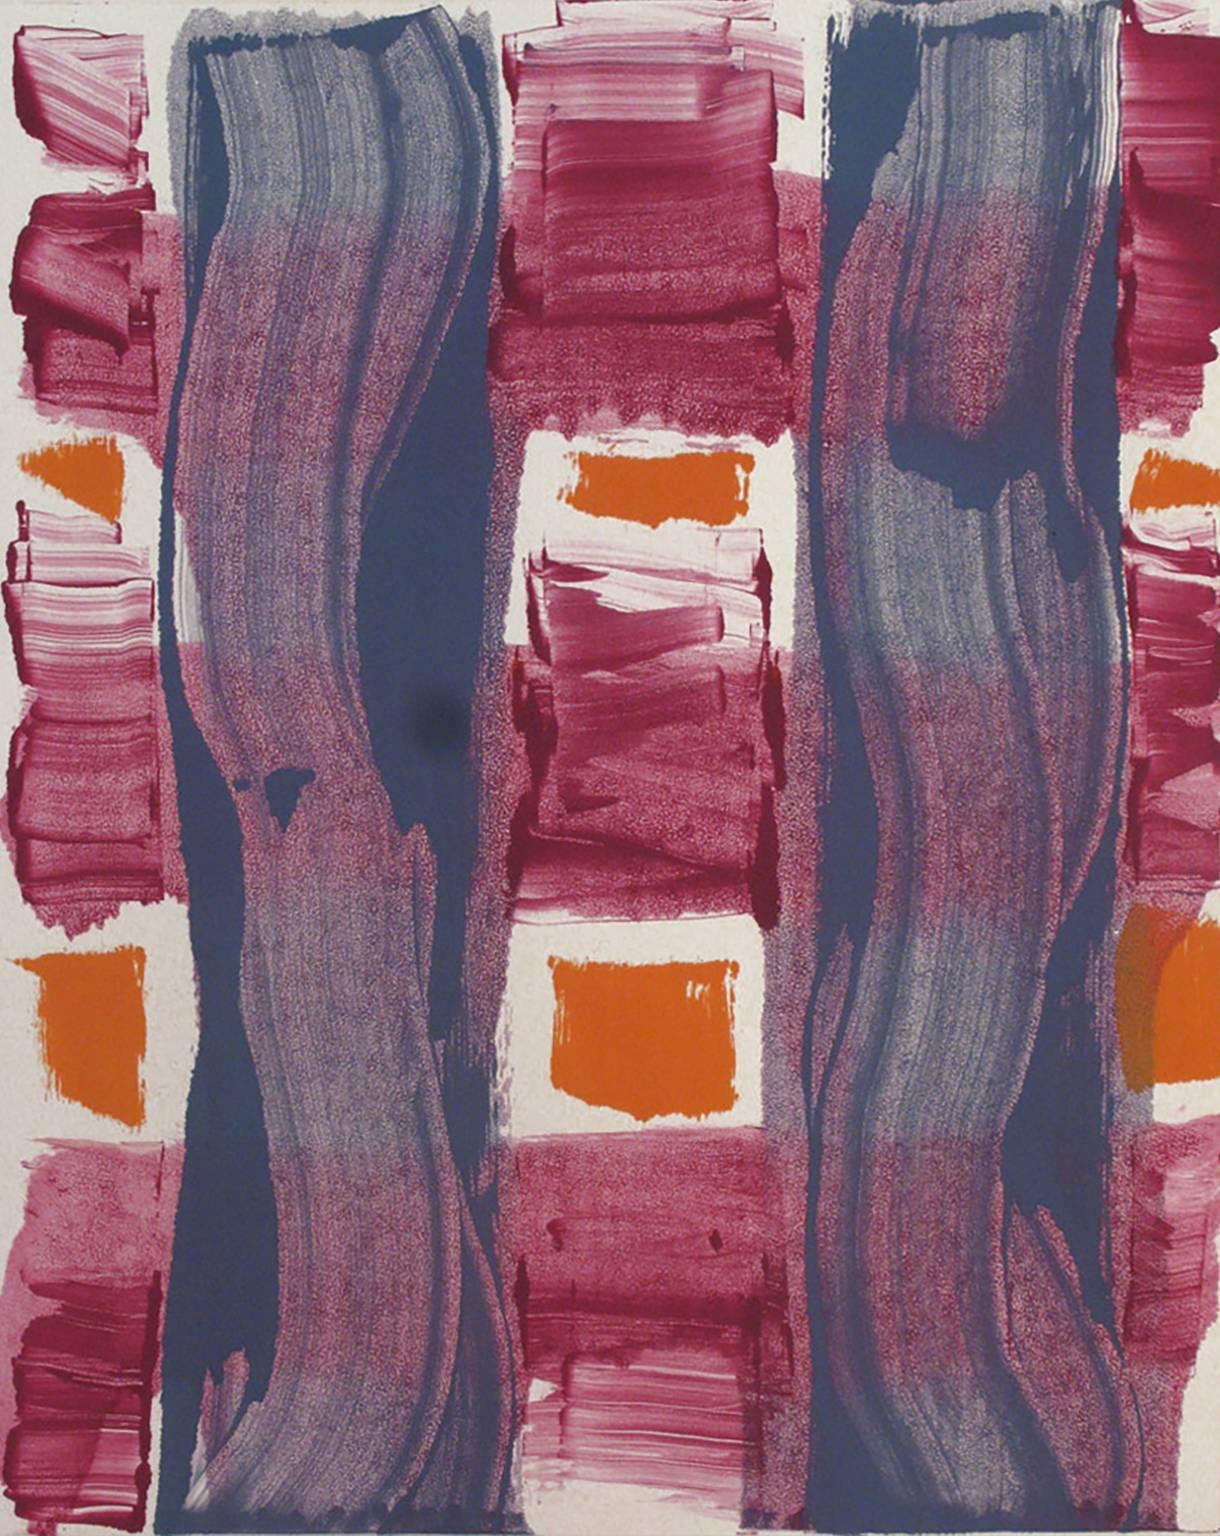 Anita Thacher Abstract Print - “Piscamento #2”painterly abstract monoprint, magenta, grey, and orange.